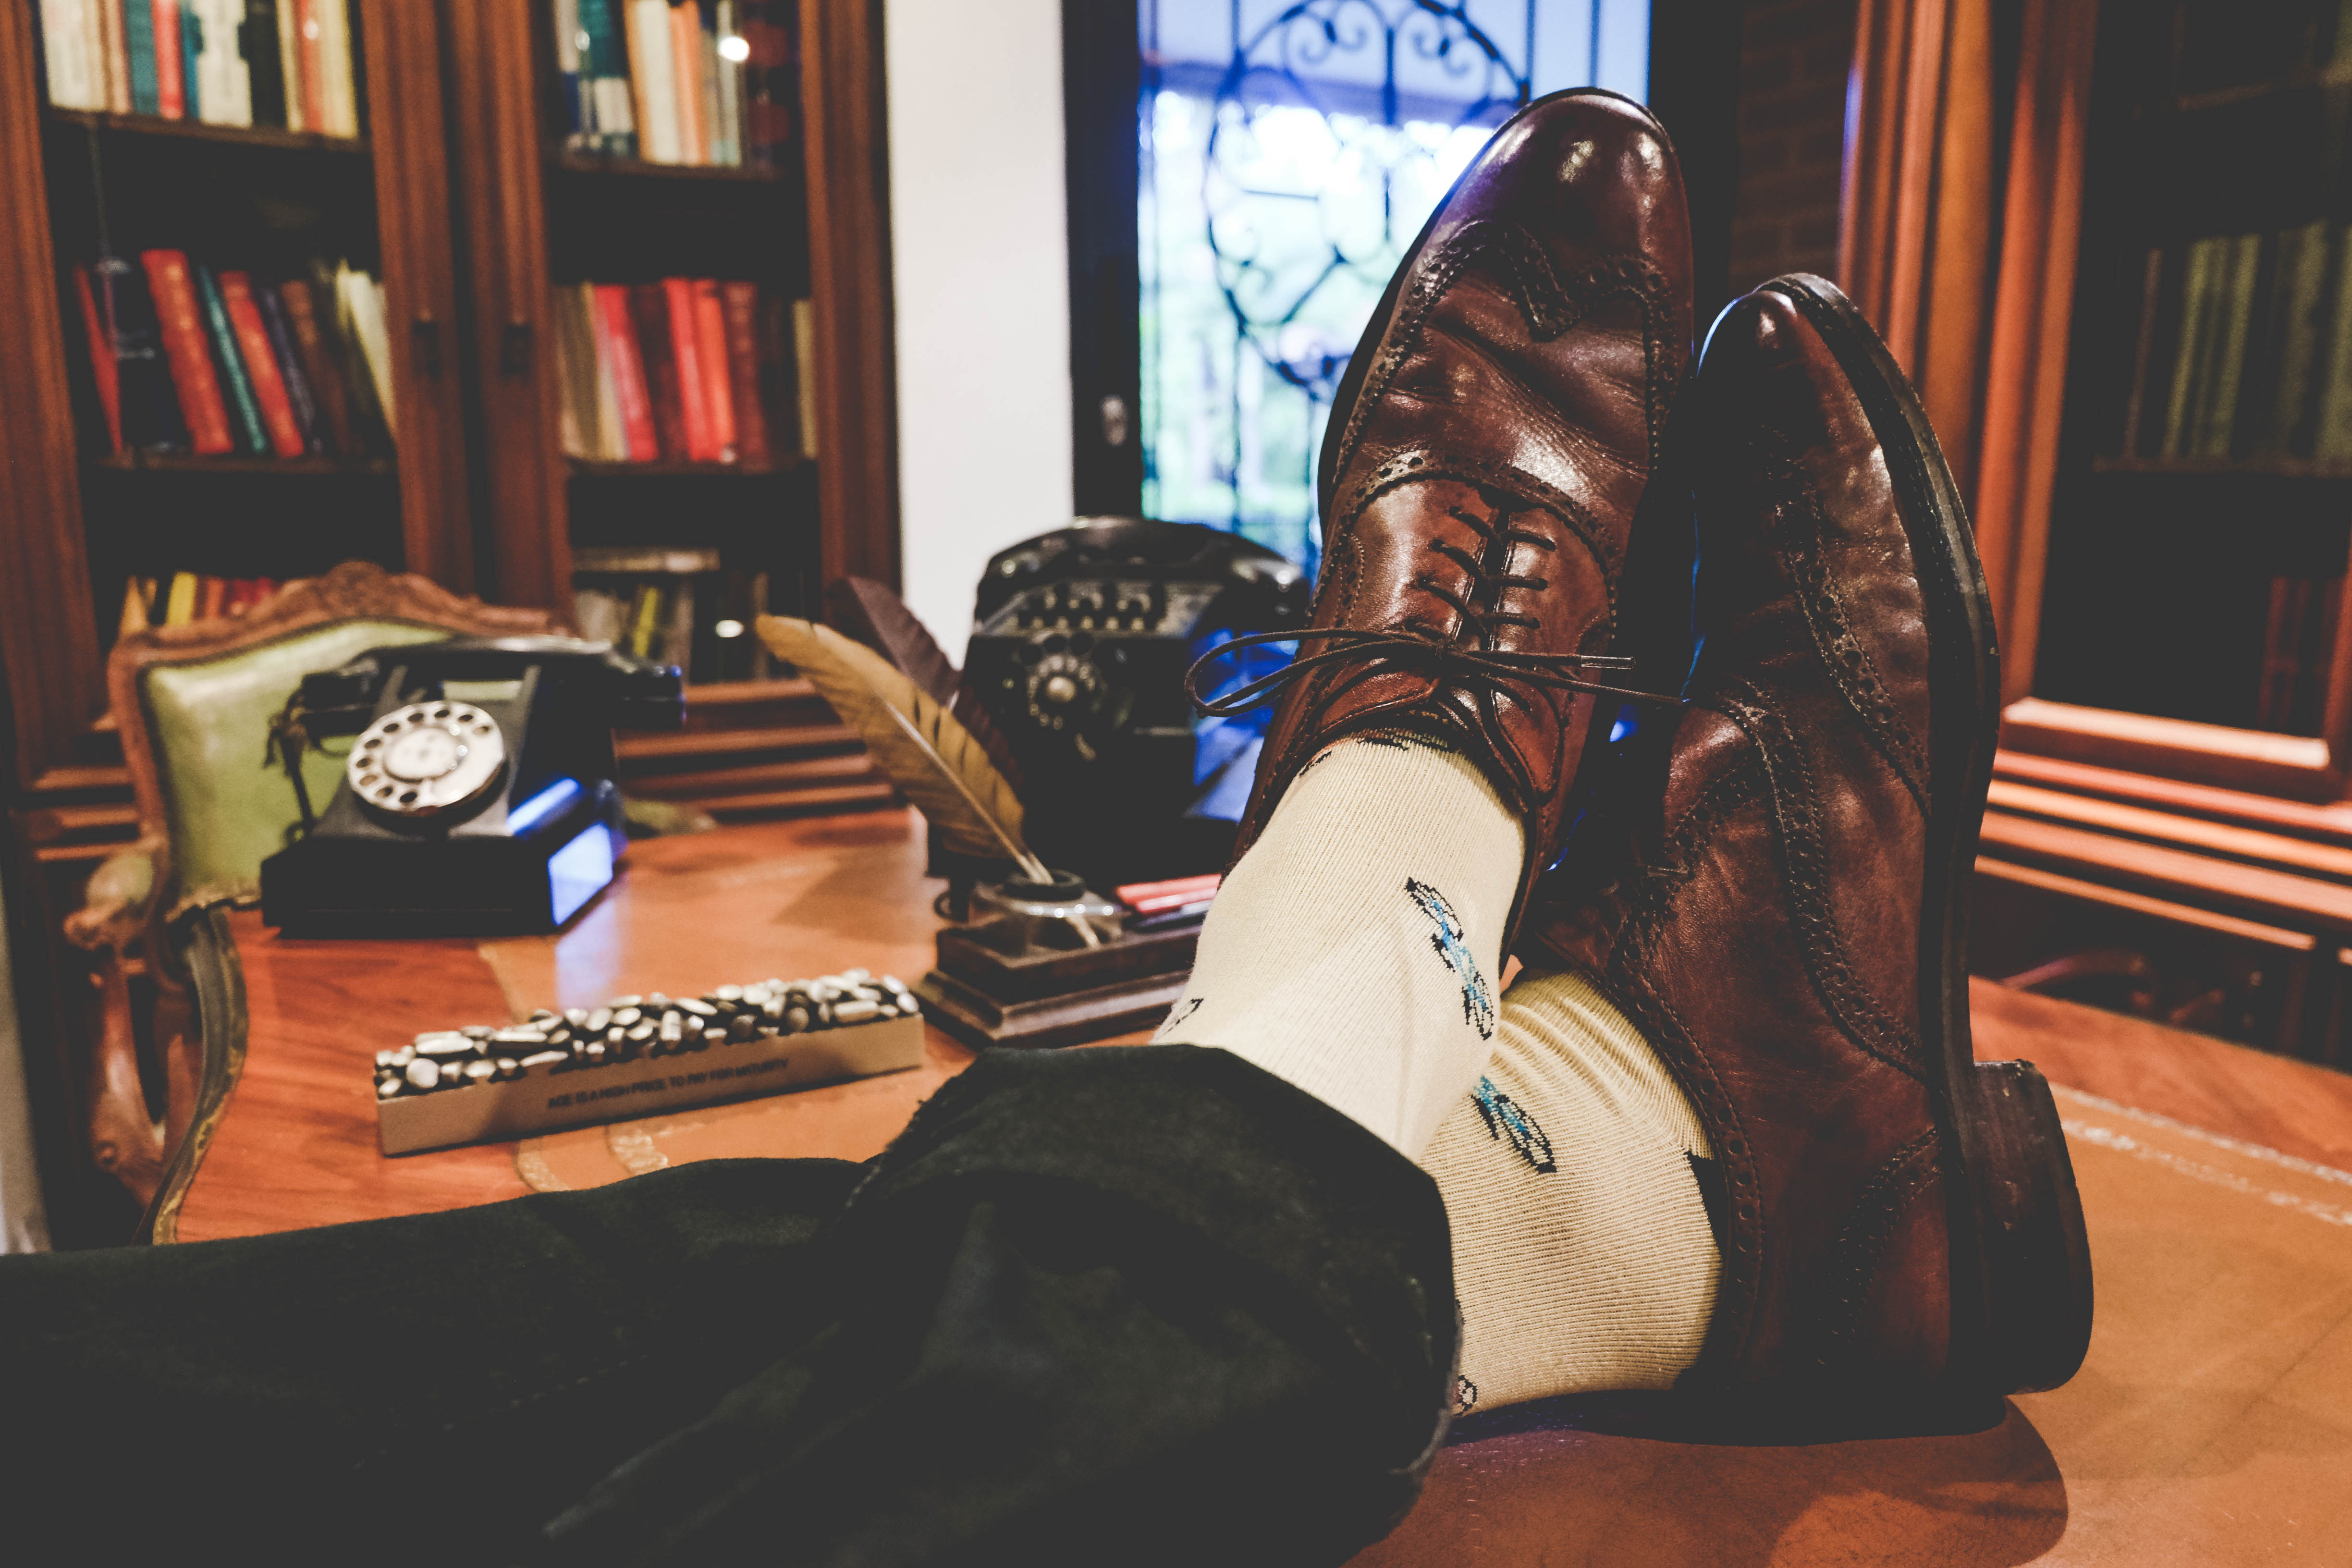 beige over the calf dress socks with cycle pattern, brown dress shoes, black pants